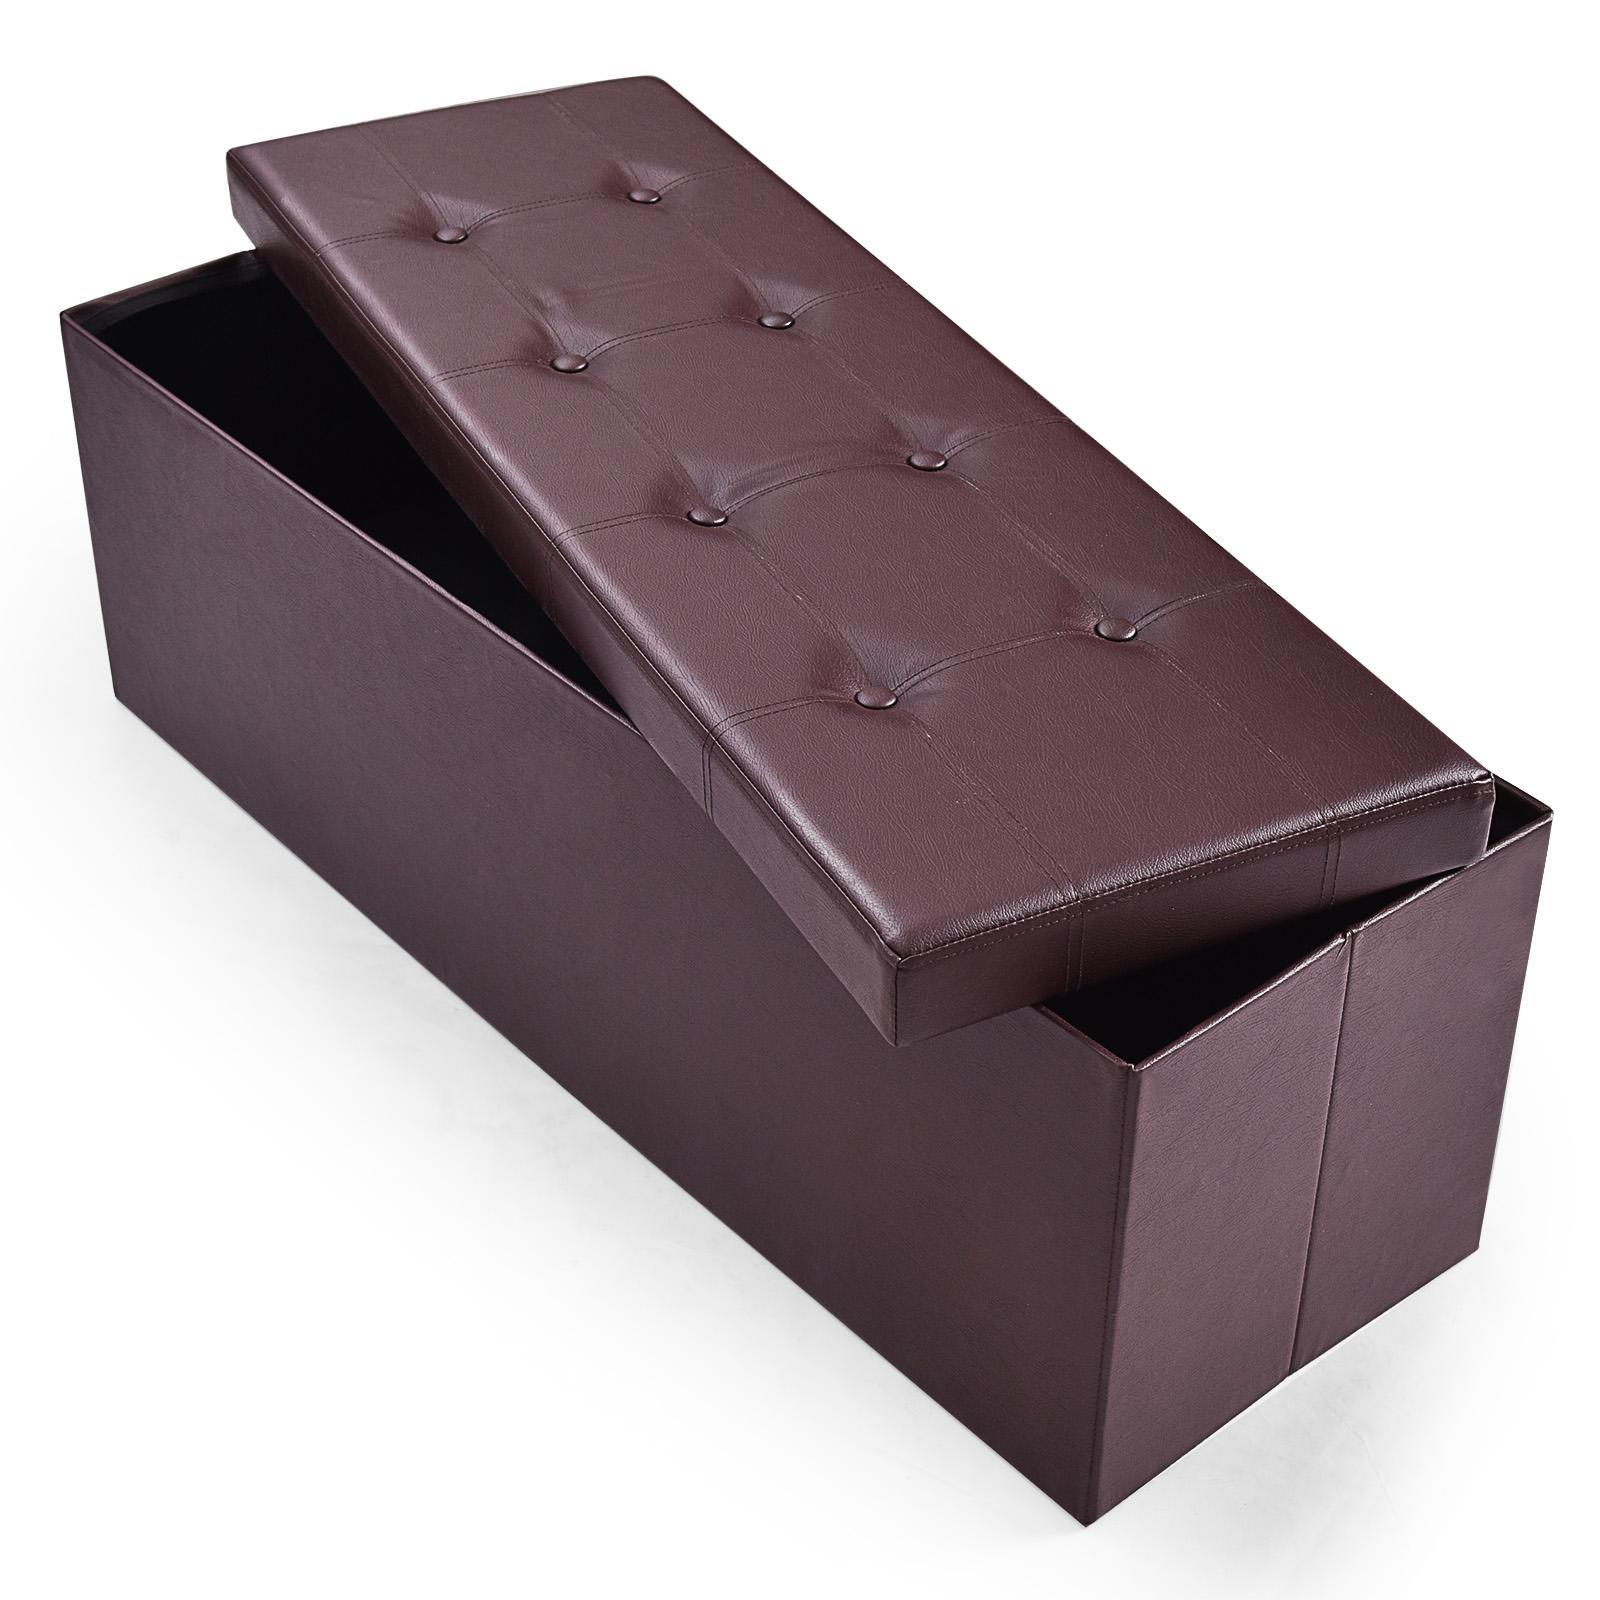 Giantex Folding Storage Ottoman Bench Faux Leather Foot Rest Chest Stool w/Padded Seat Brown